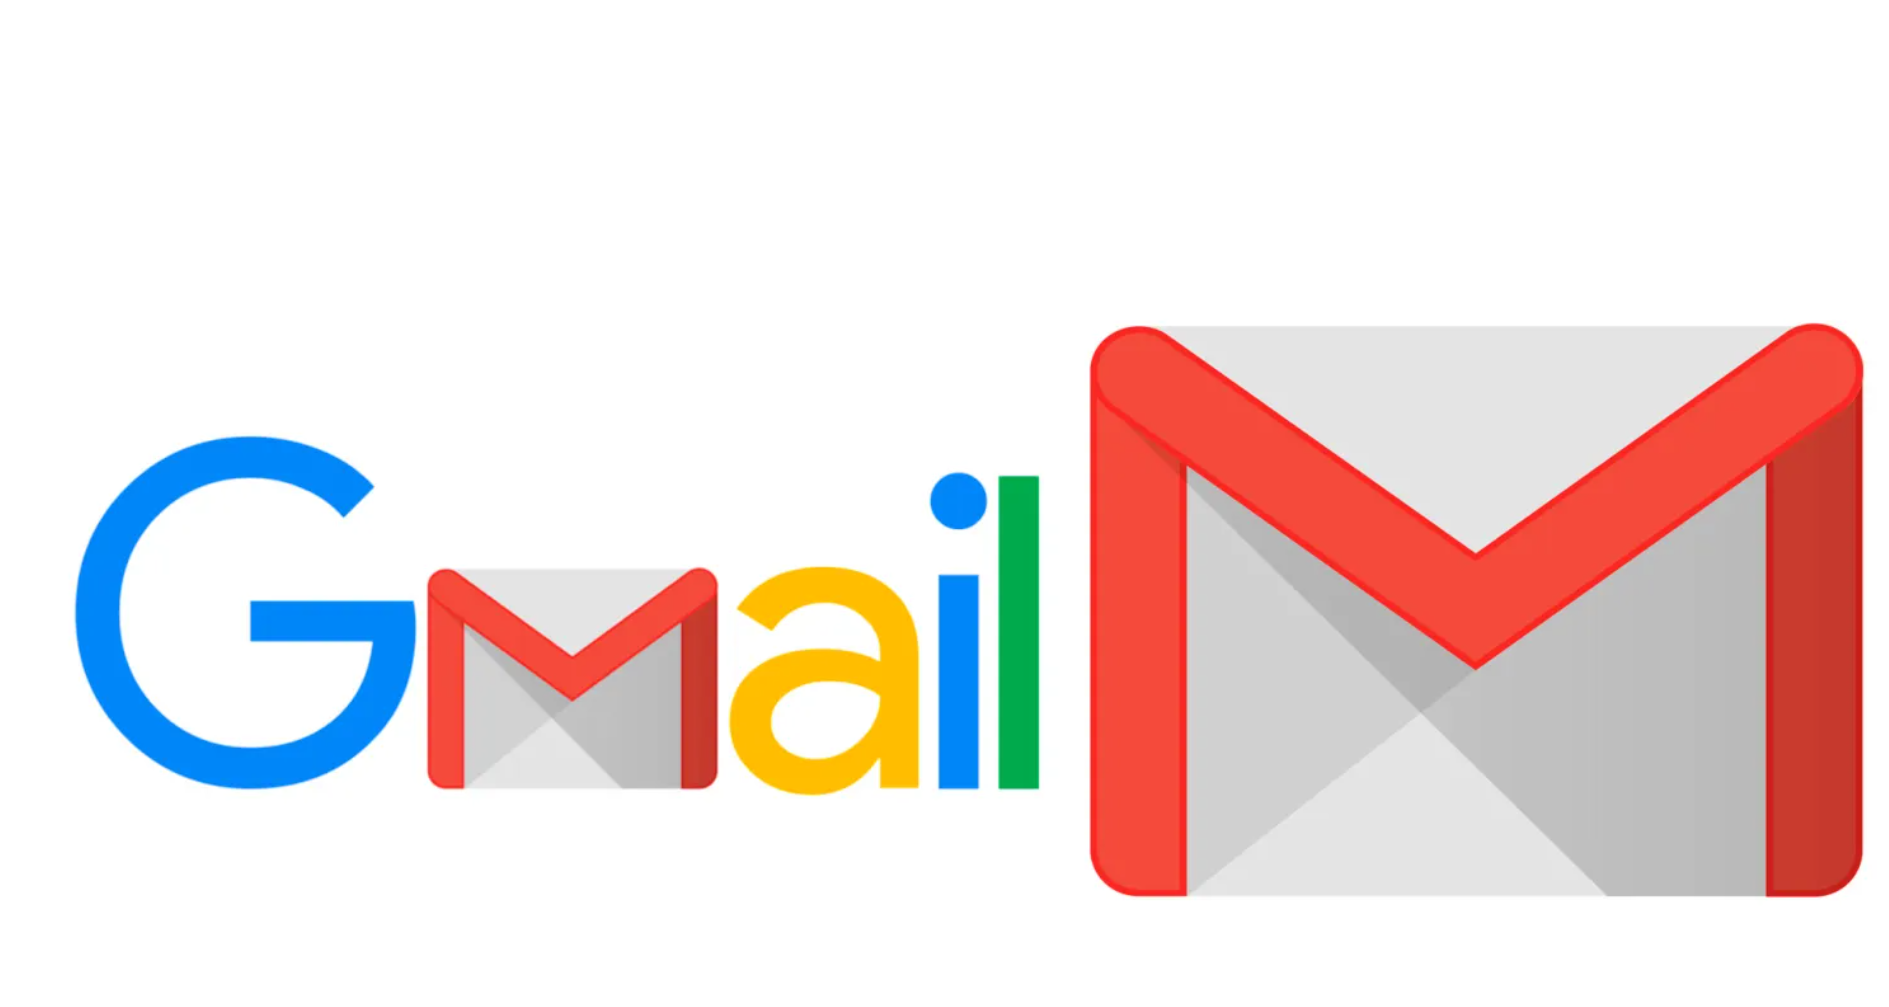 How To Delete Old Emails In Gmail - Gmail Delete Old Emails Automatically